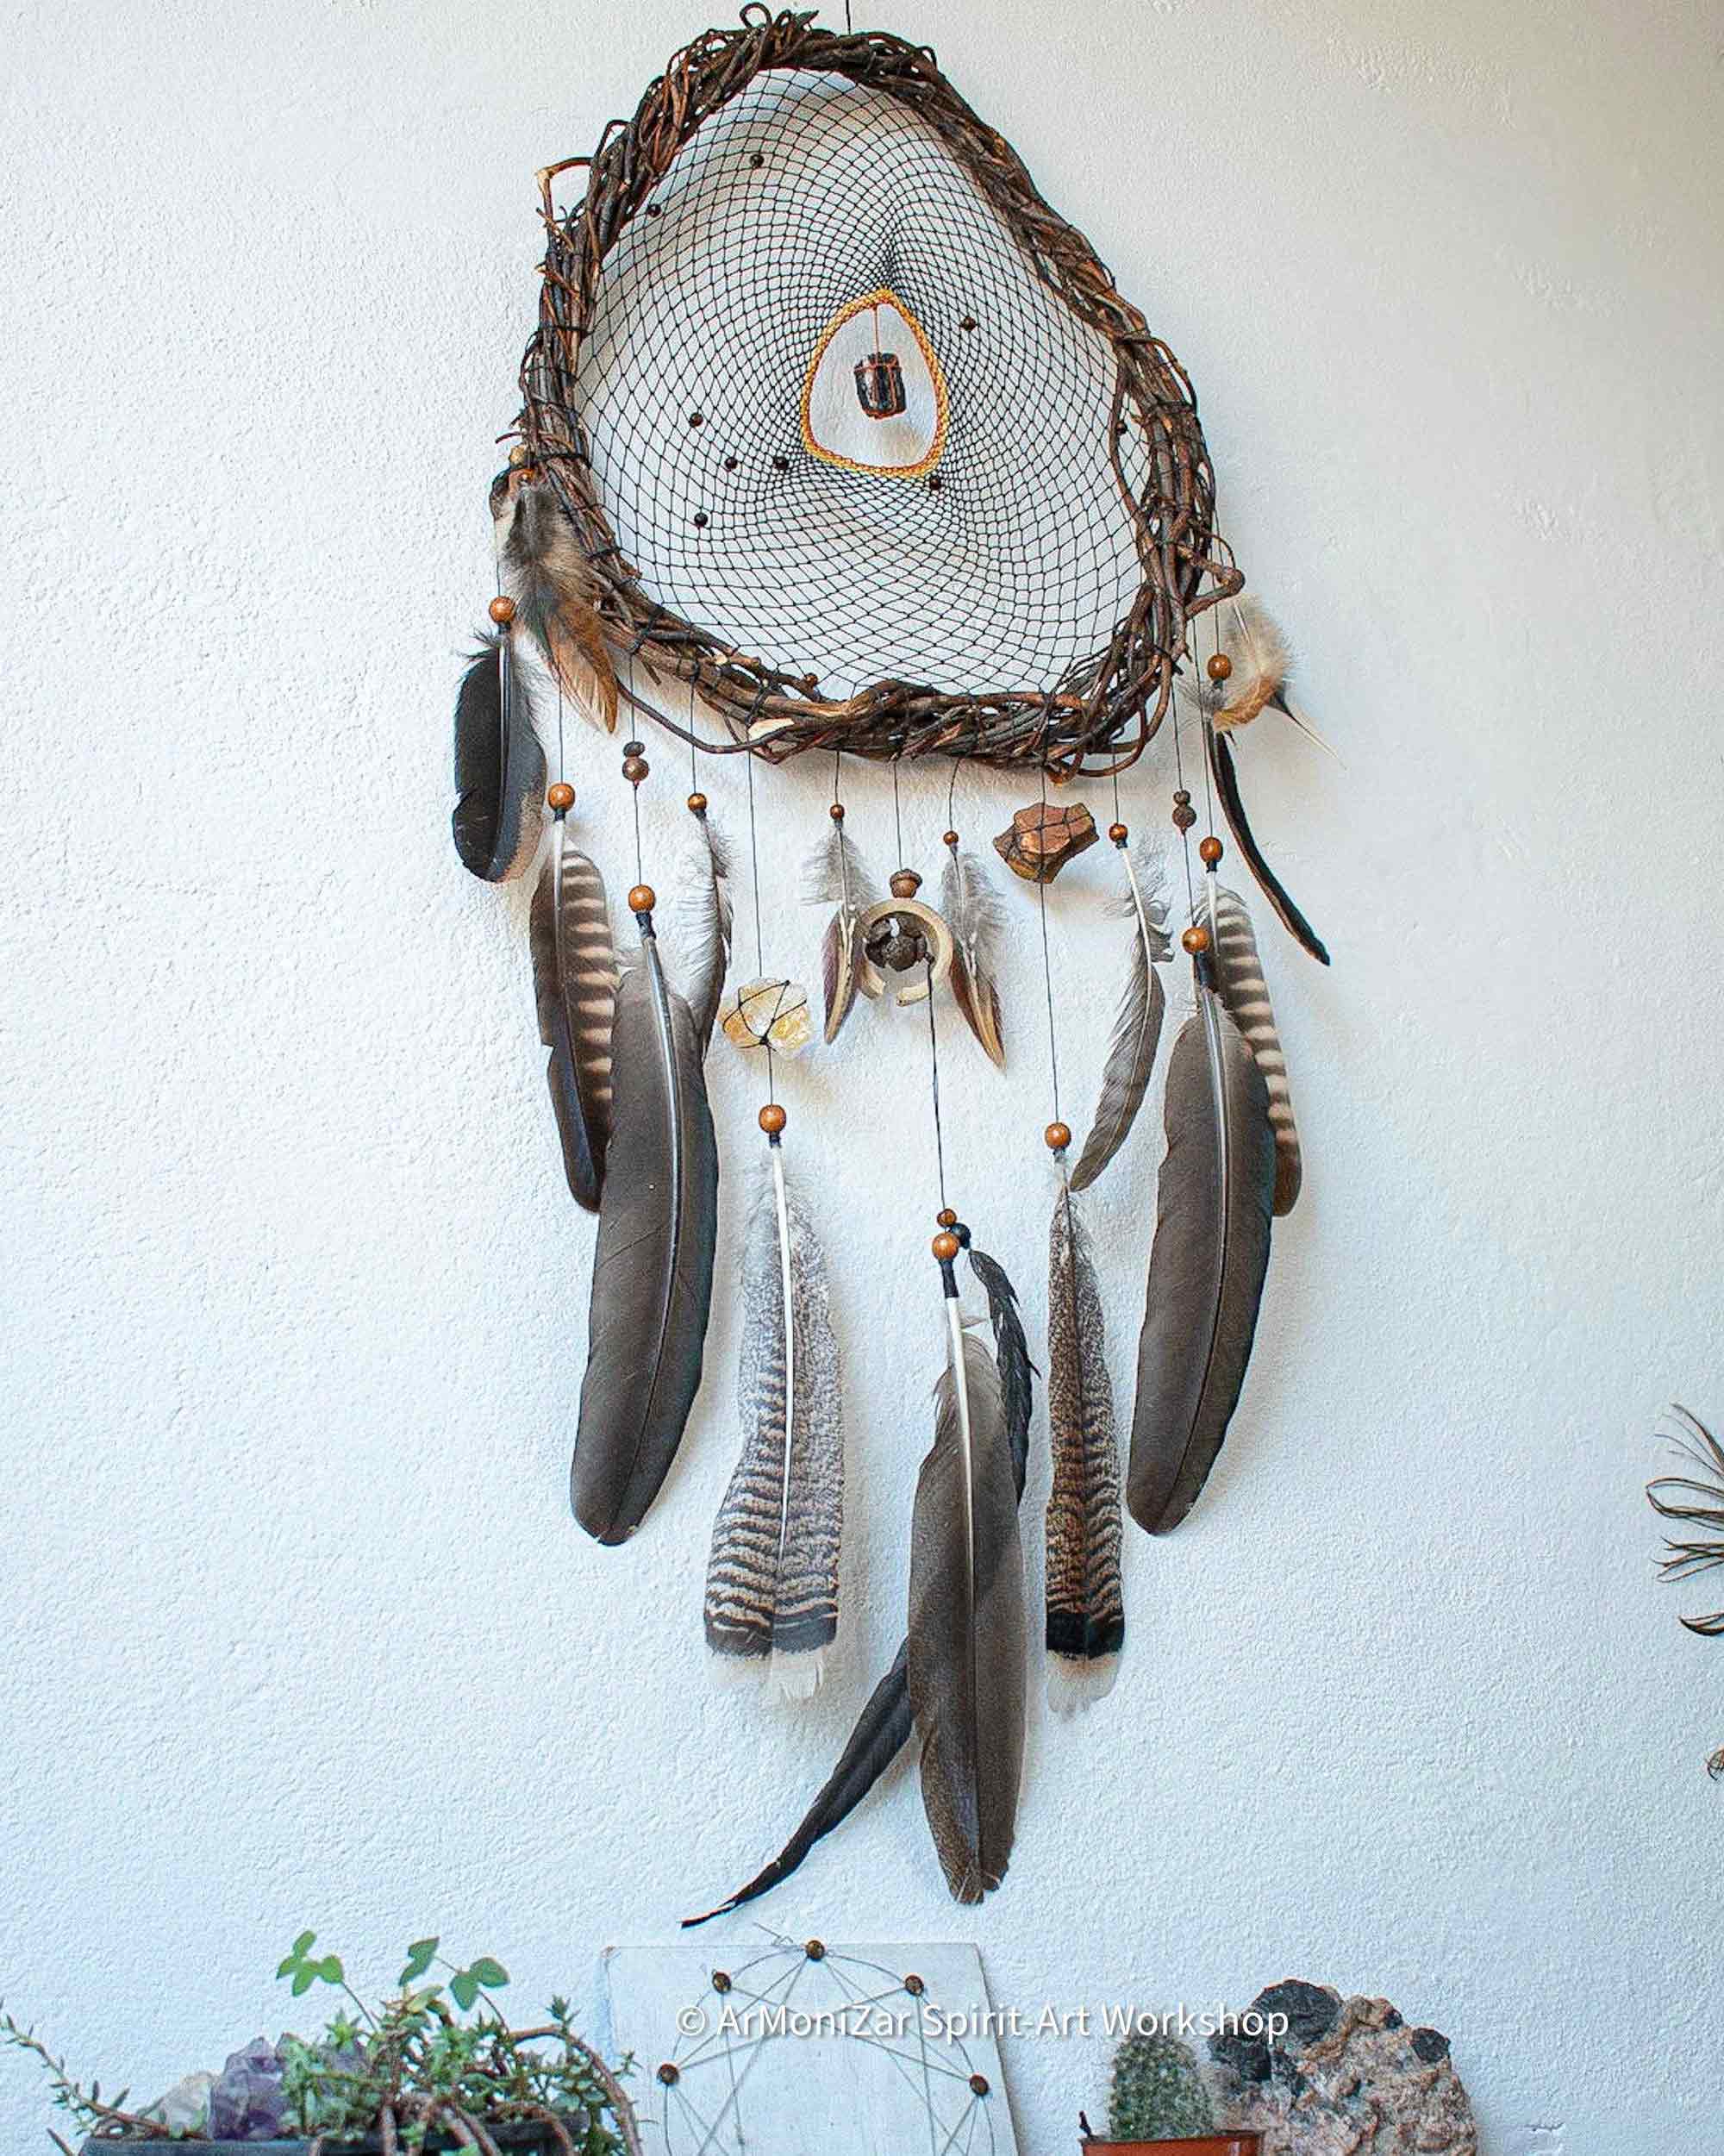 Nature art dream catcher personalized gift mother earth style stones and mix feathers assortment ArMoniZar